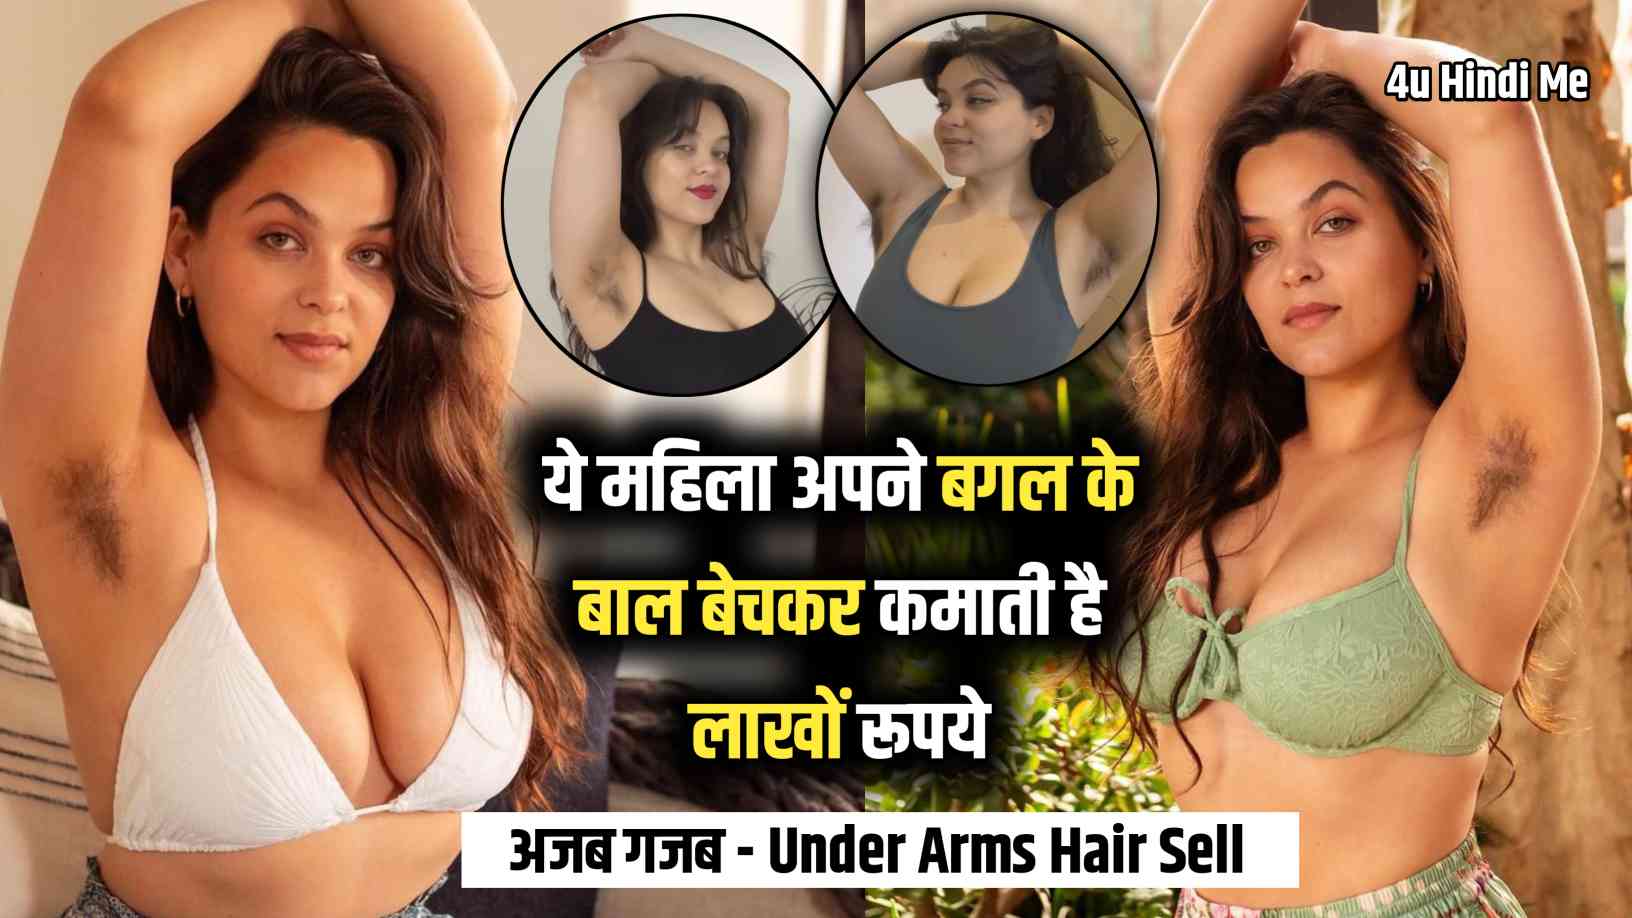 Under Arms Hair Sell